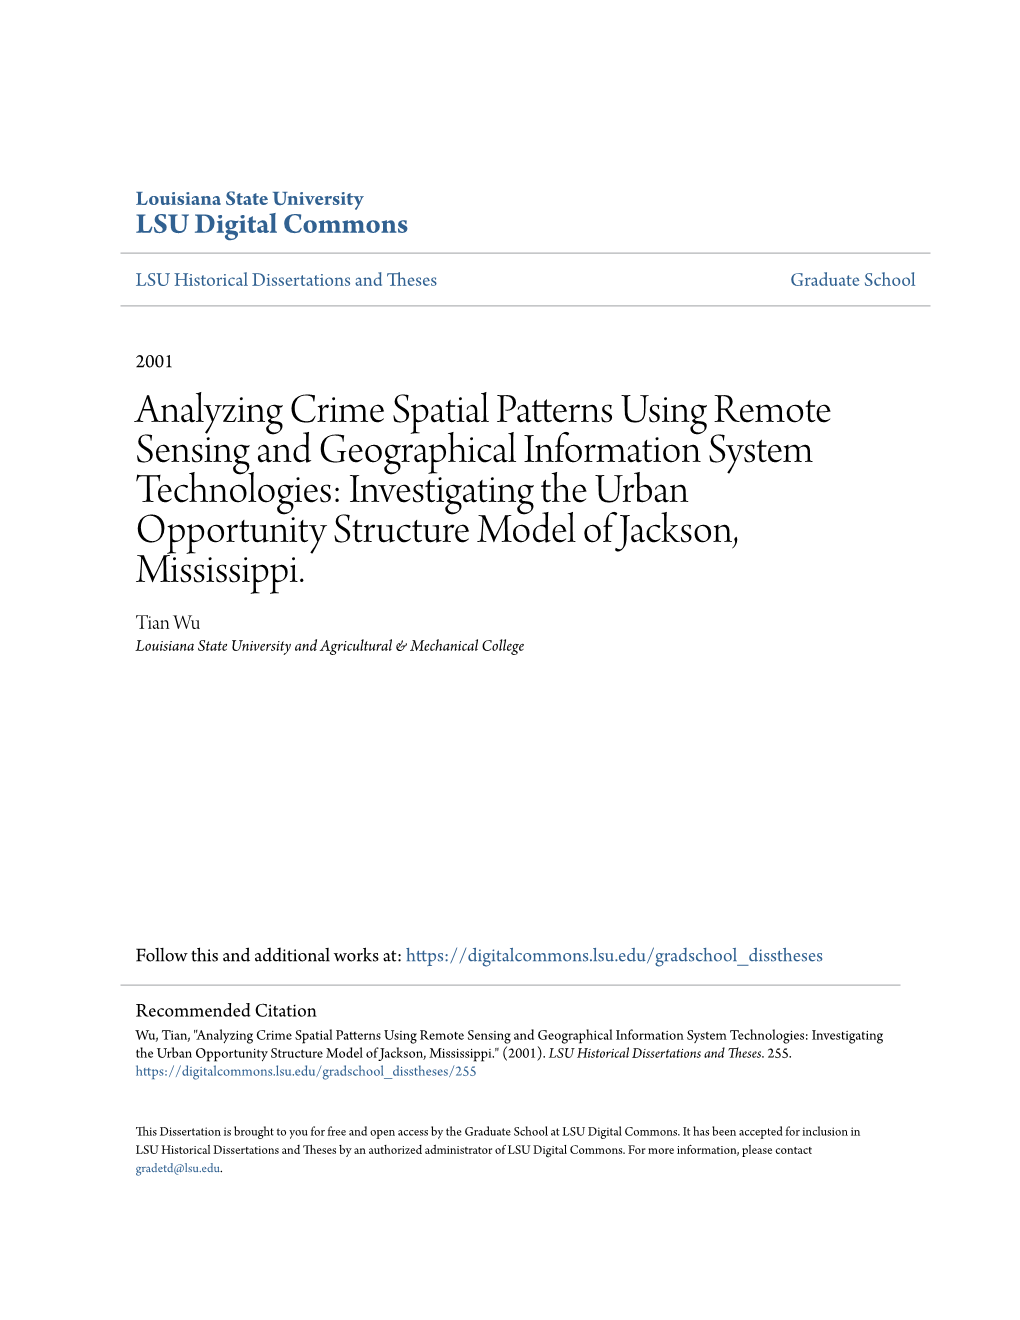 Analyzing Crime Spatial Patterns Using Remote Sensing And